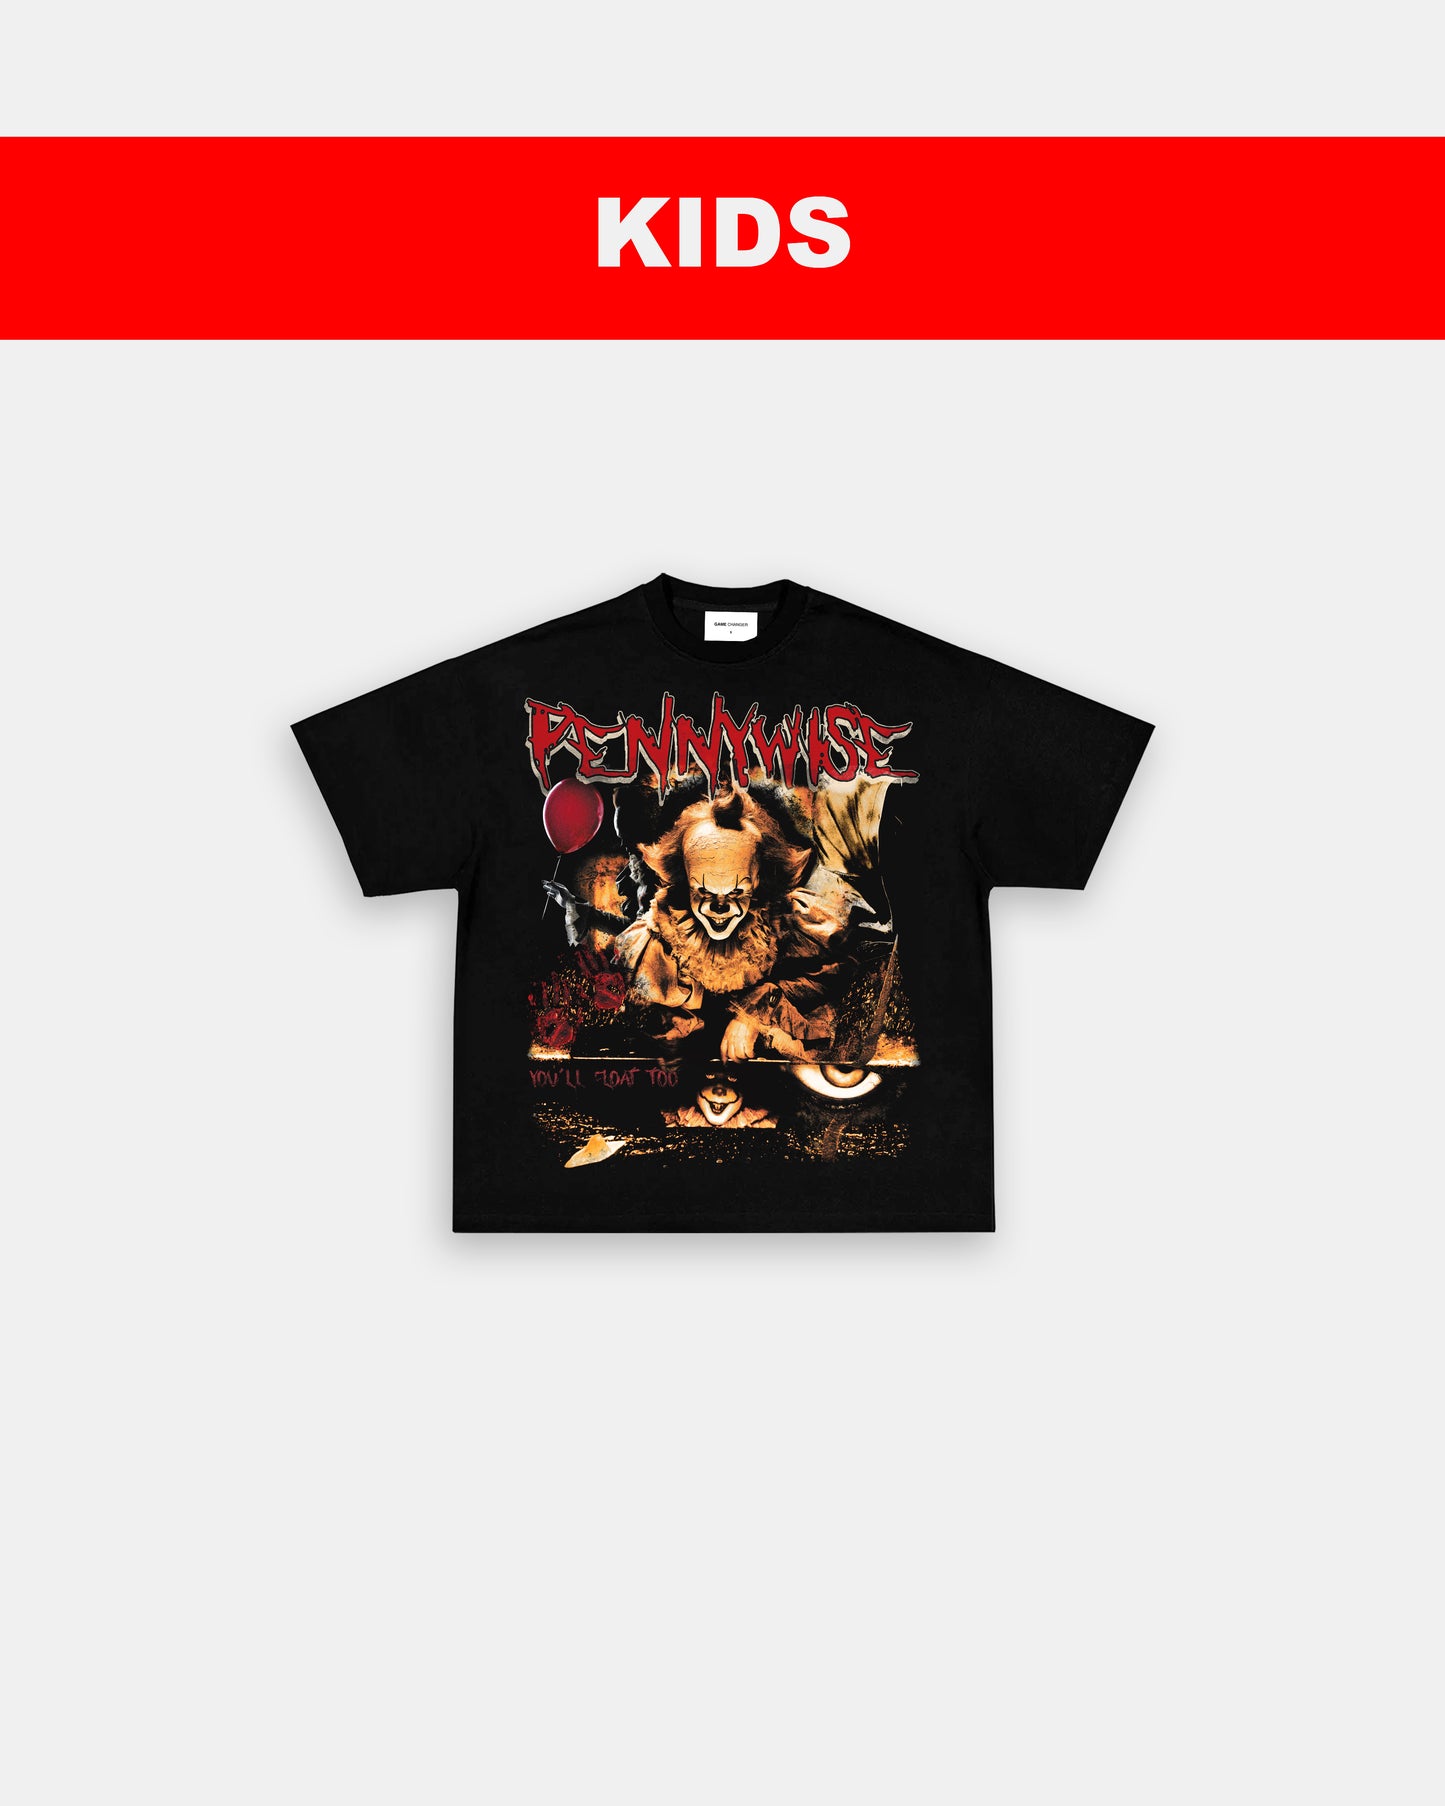 PENNYWISE V2 - KIDS TEE